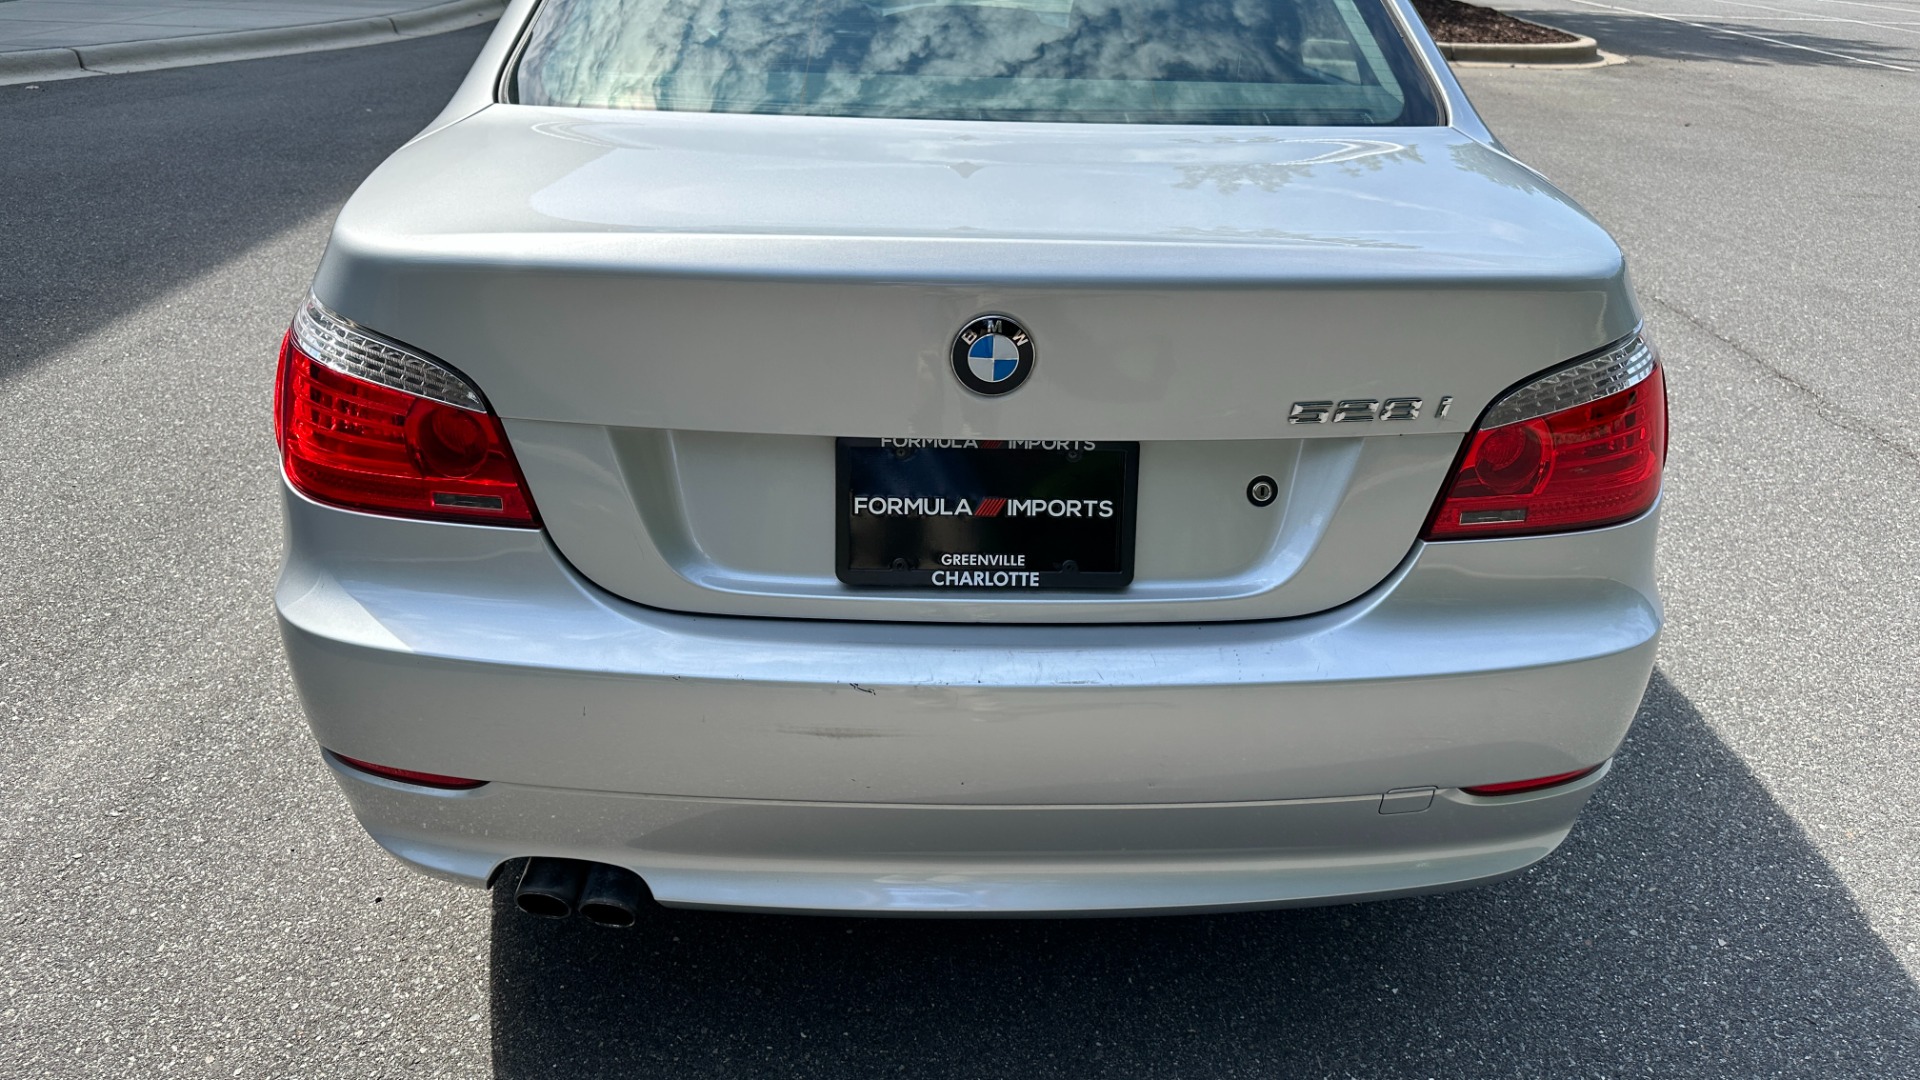 Used 2009 BMW 5 Series 528i / SPORT PACKAGE / PREMIUM PACKAGE / DAKOTA LEATHER for sale $14,995 at Formula Imports in Charlotte NC 28227 8